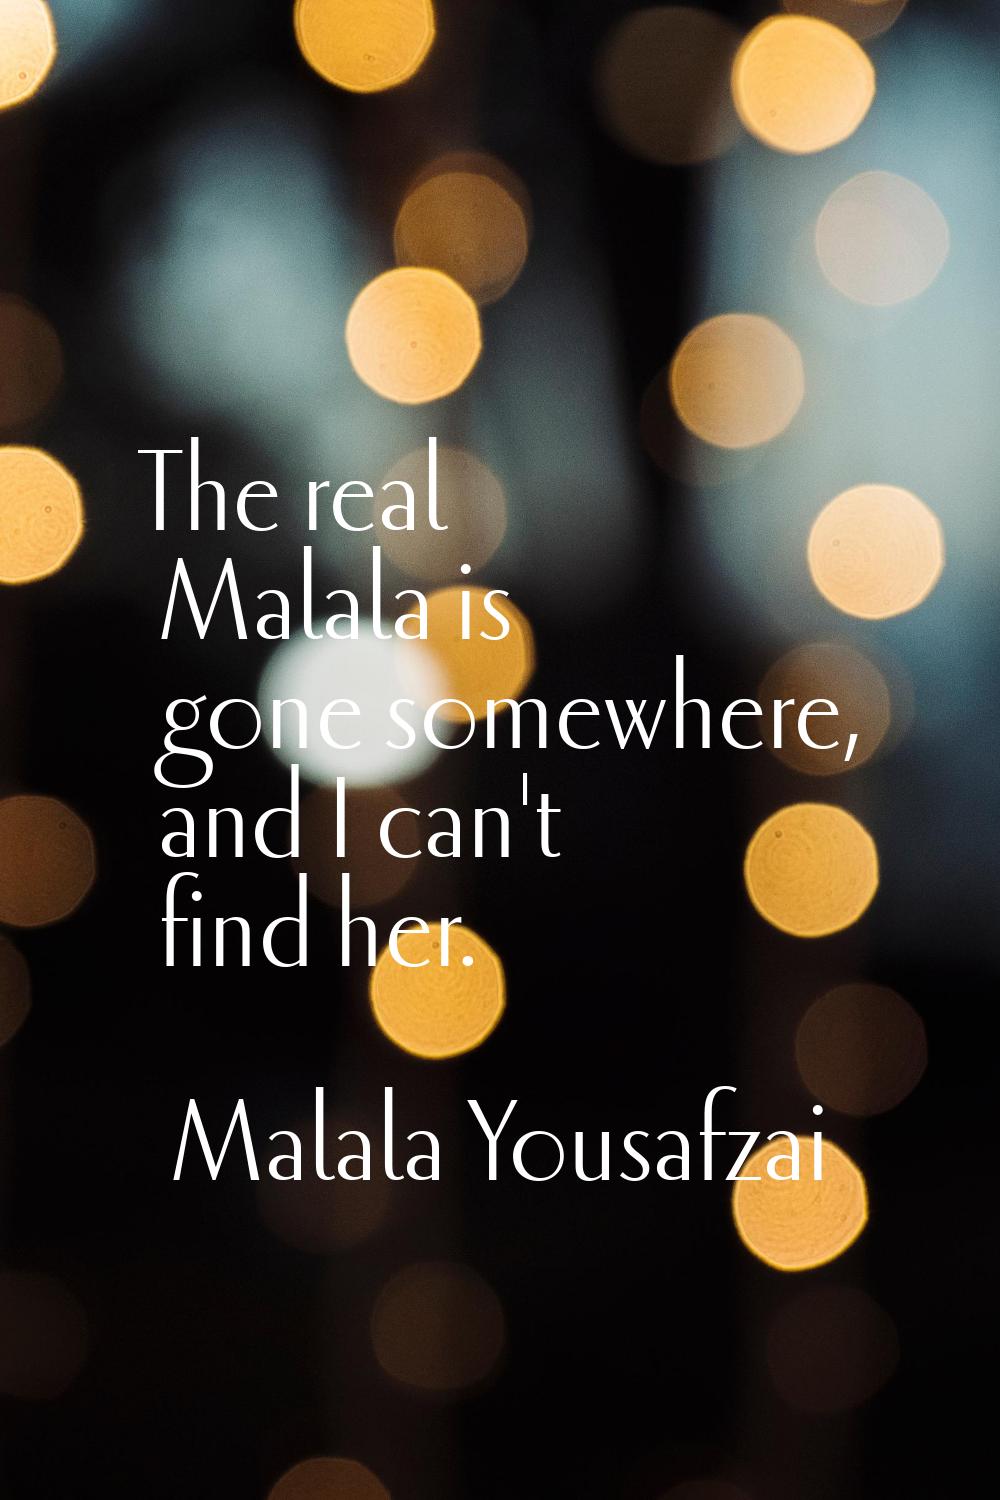 The real Malala is gone somewhere, and I can't find her.